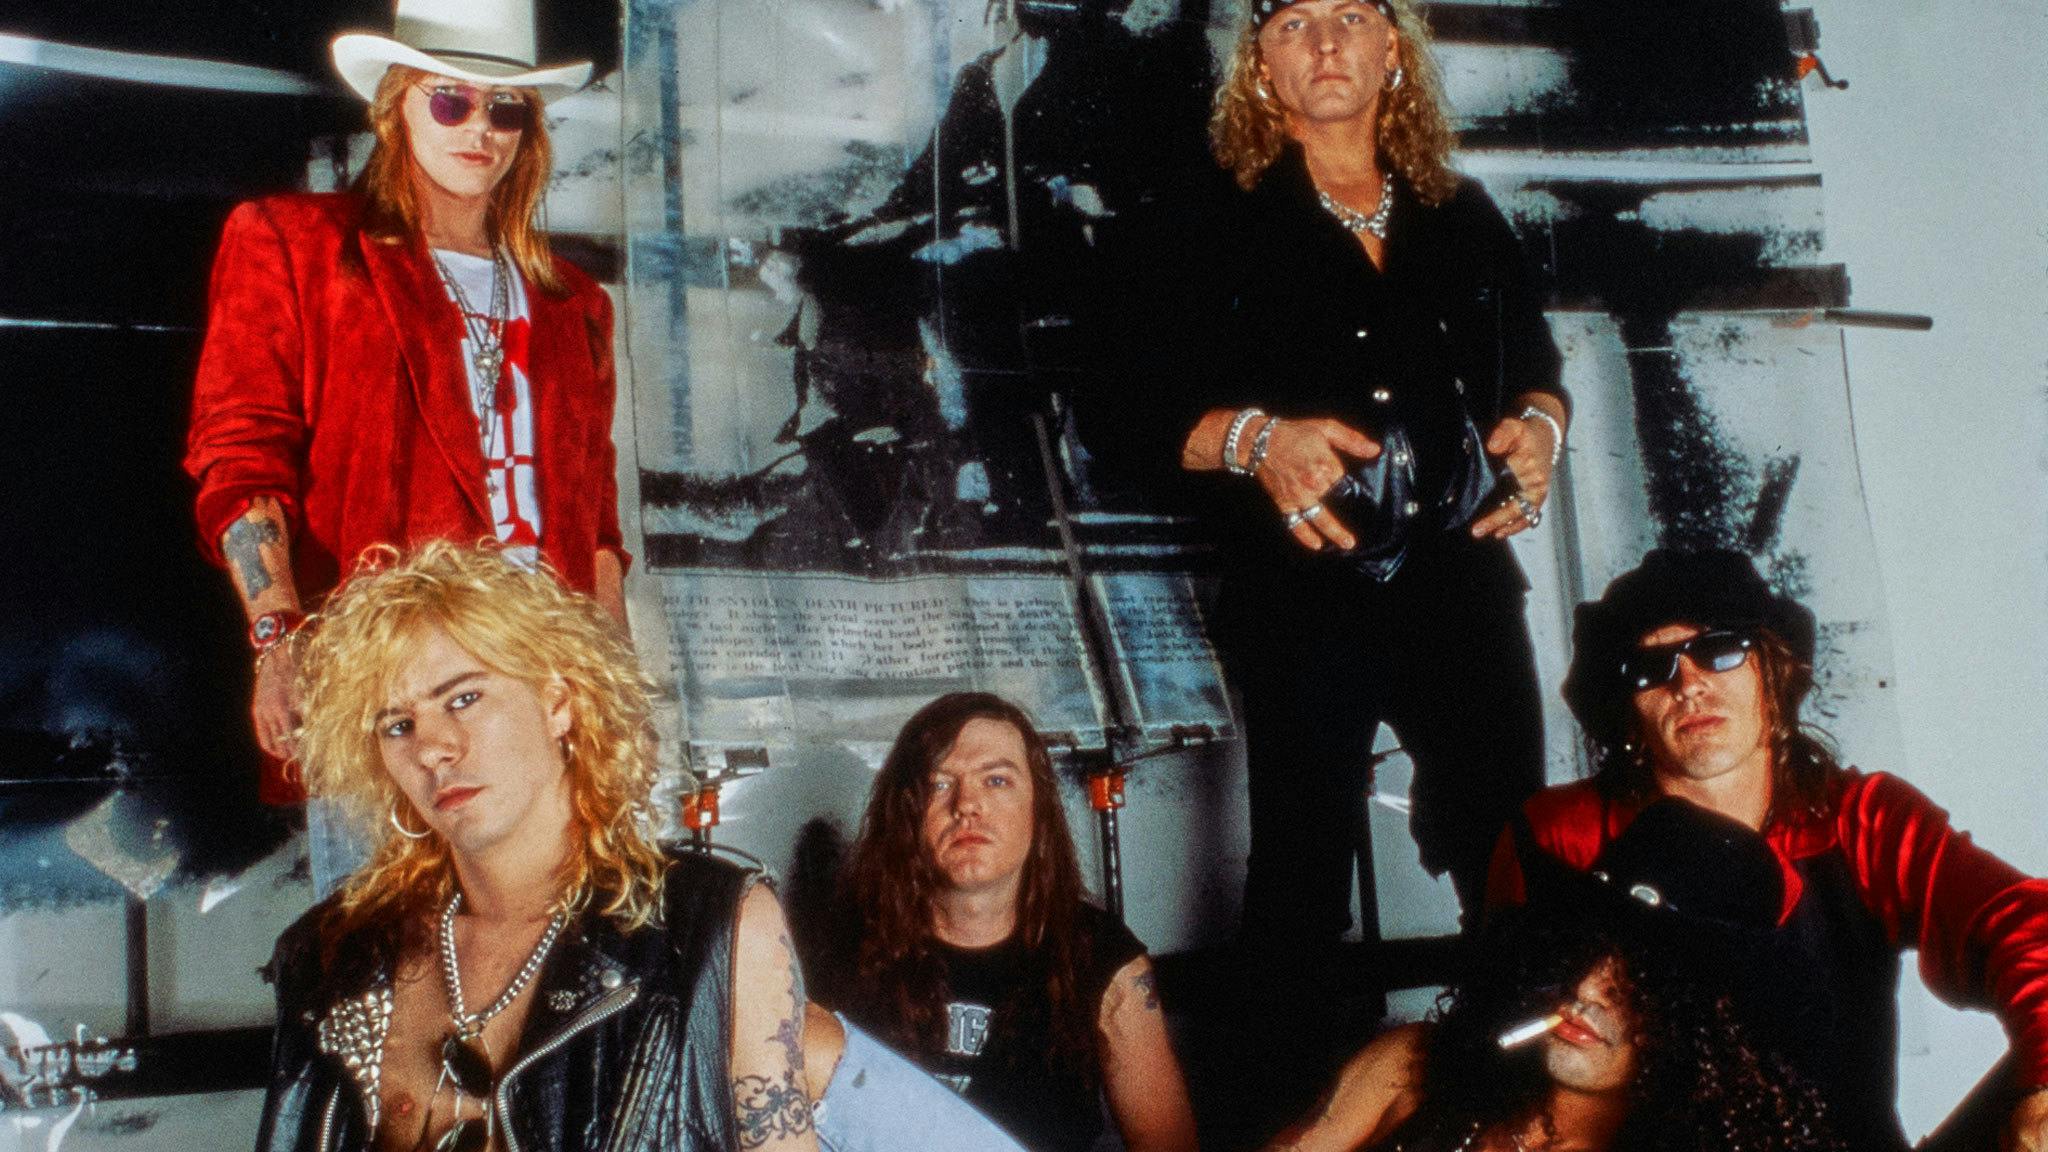 Guns N’ Roses release new version of November Rain with 50-piece orchestra